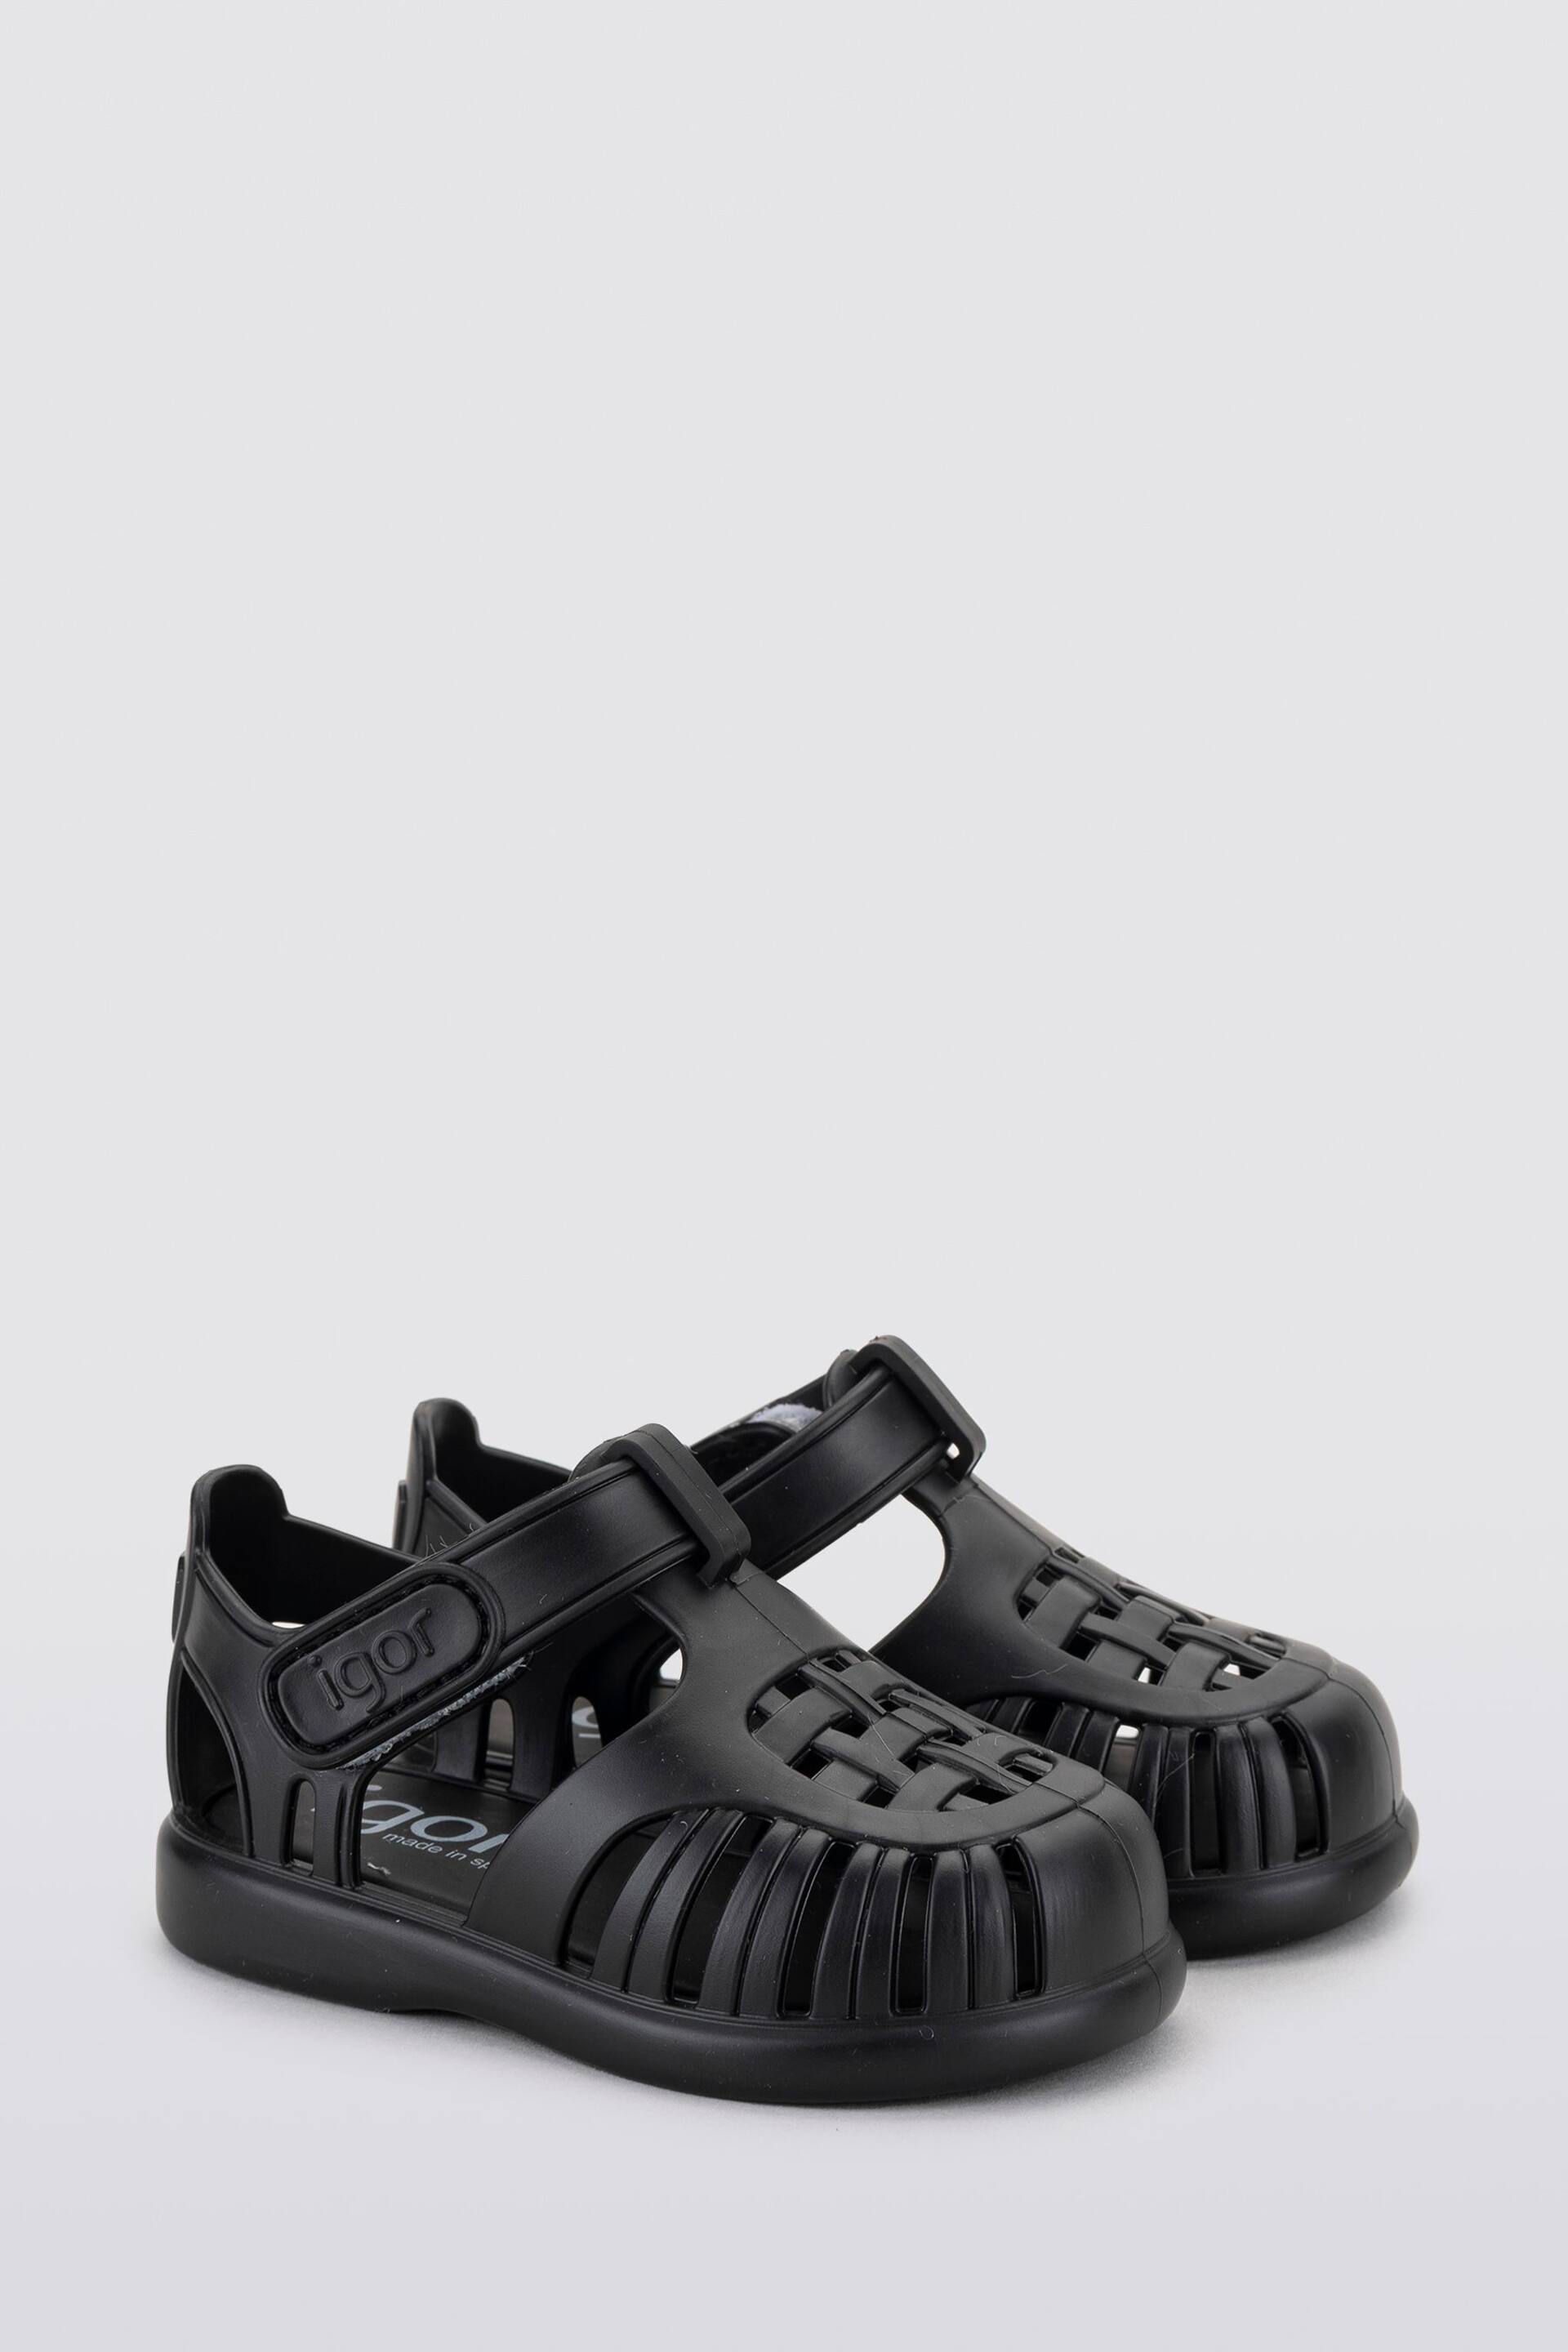 Igor Tobby Solid Sandals - Image 2 of 4